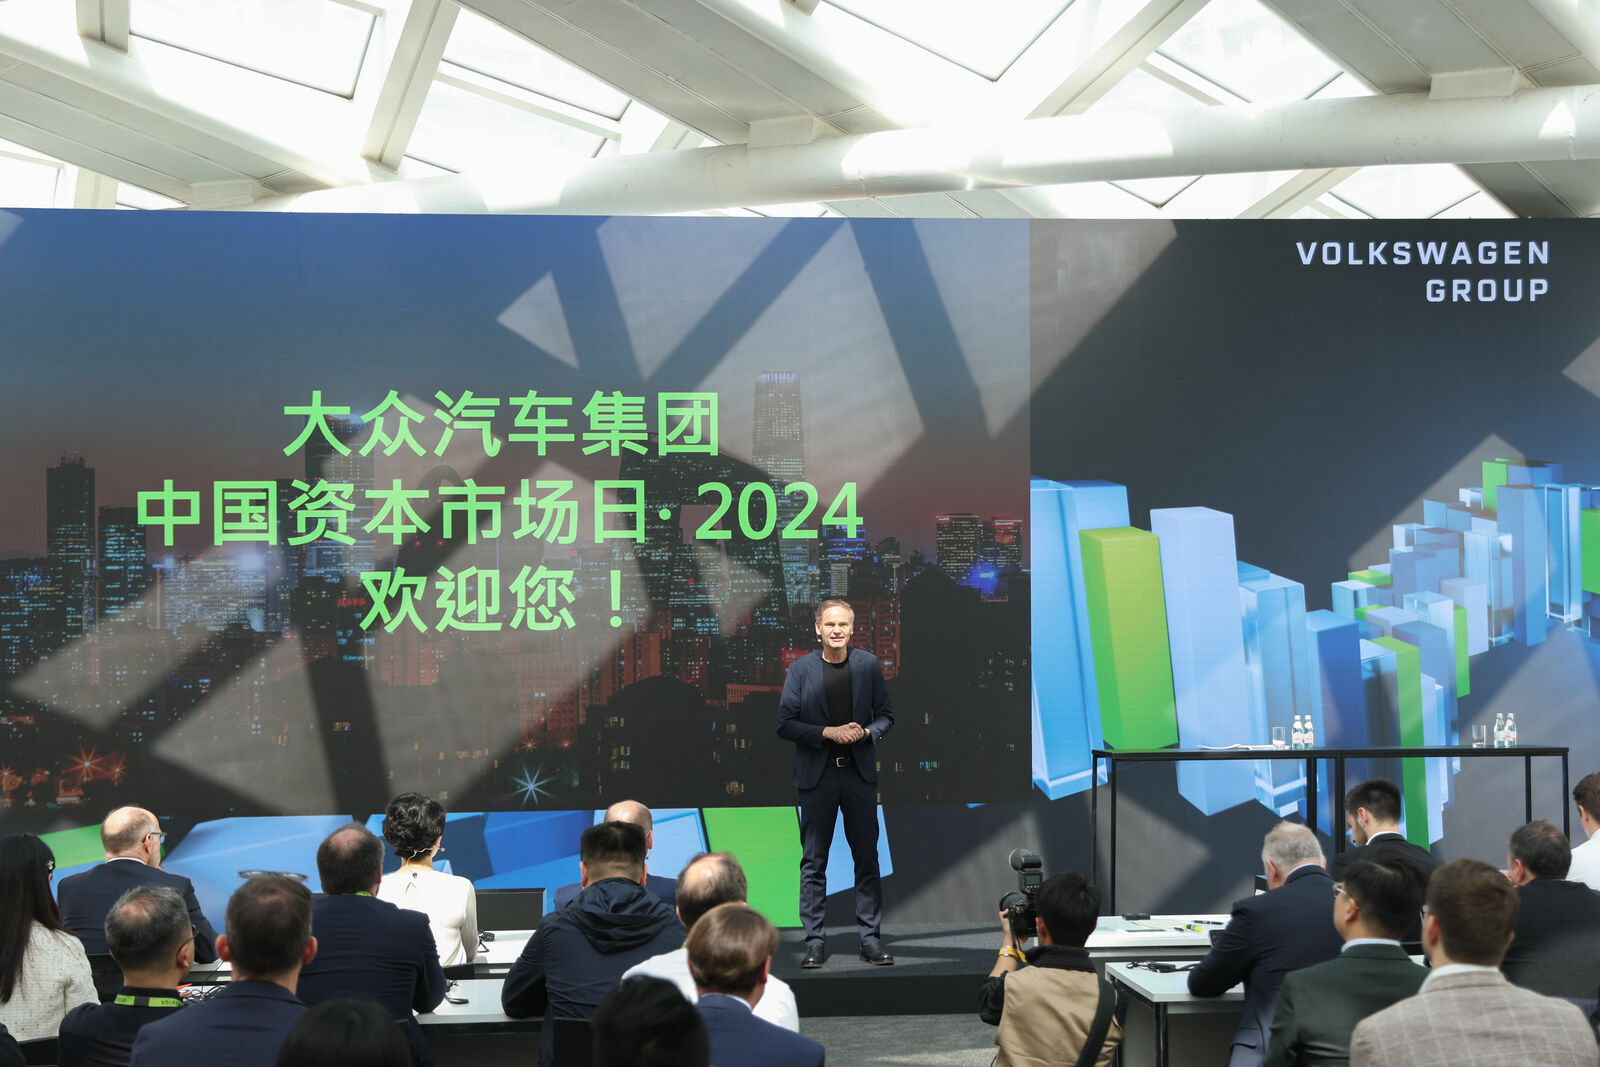 Oliver Blume, CEO Volkswagen Group, speaks at the China Capital Markets Day 2024 by the Volkswagen Group in Beijing